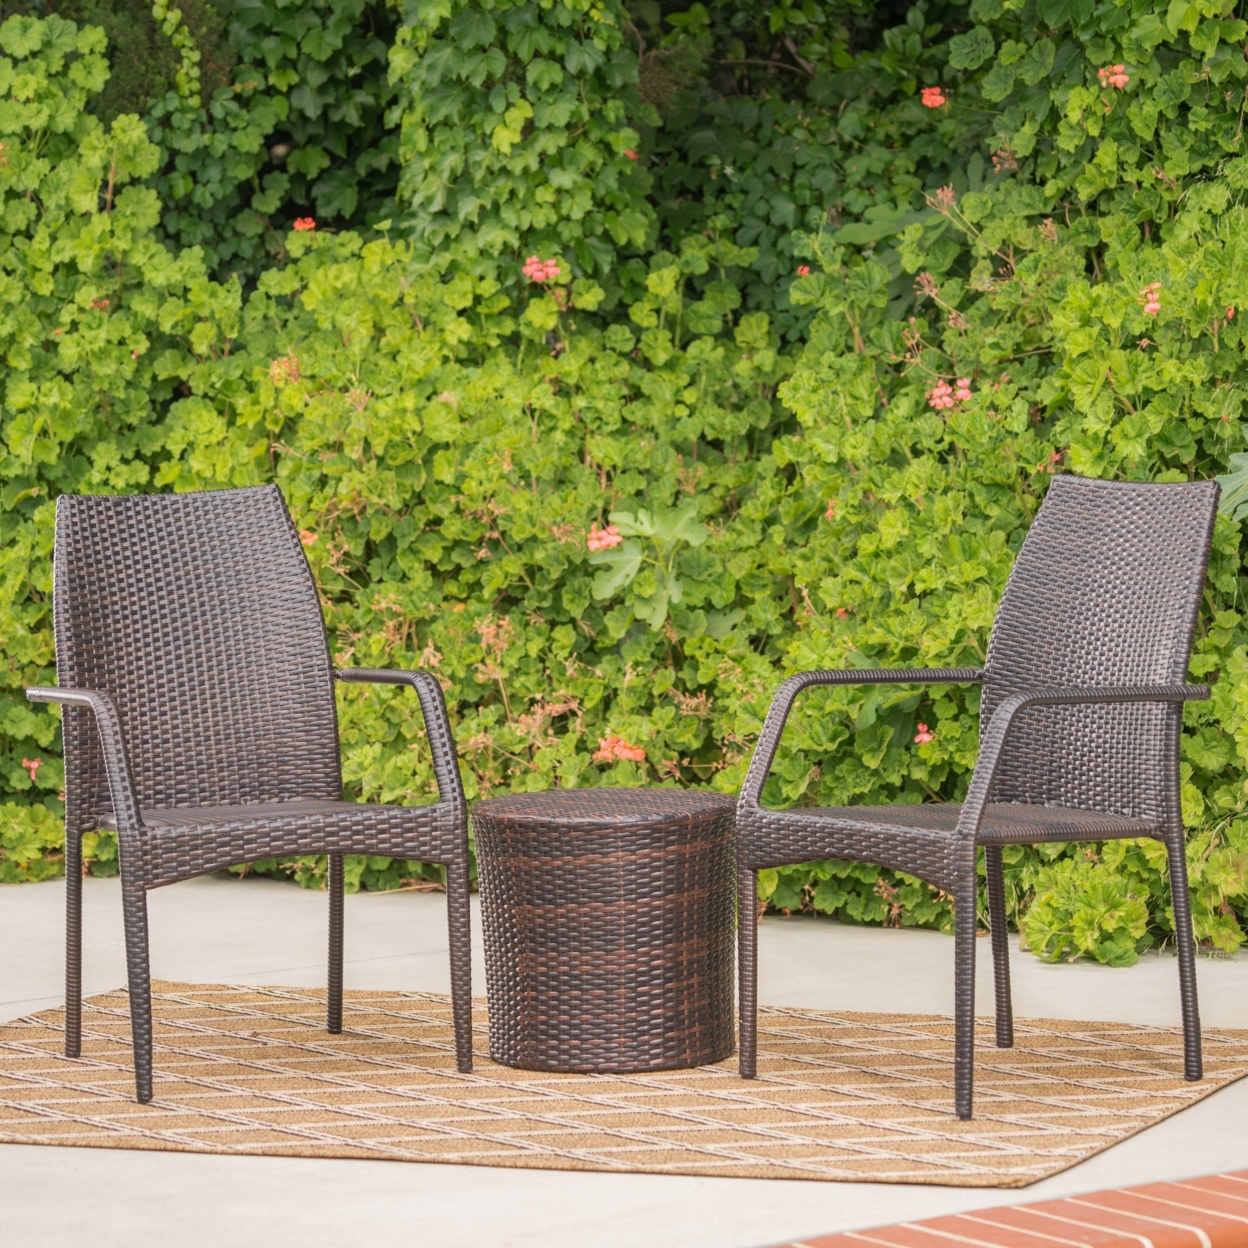 Dawson Outdoor 3 Piece Multi-brown Wicker Stacking Chair Chat Set - Skirted Hour Glass Table, Brown